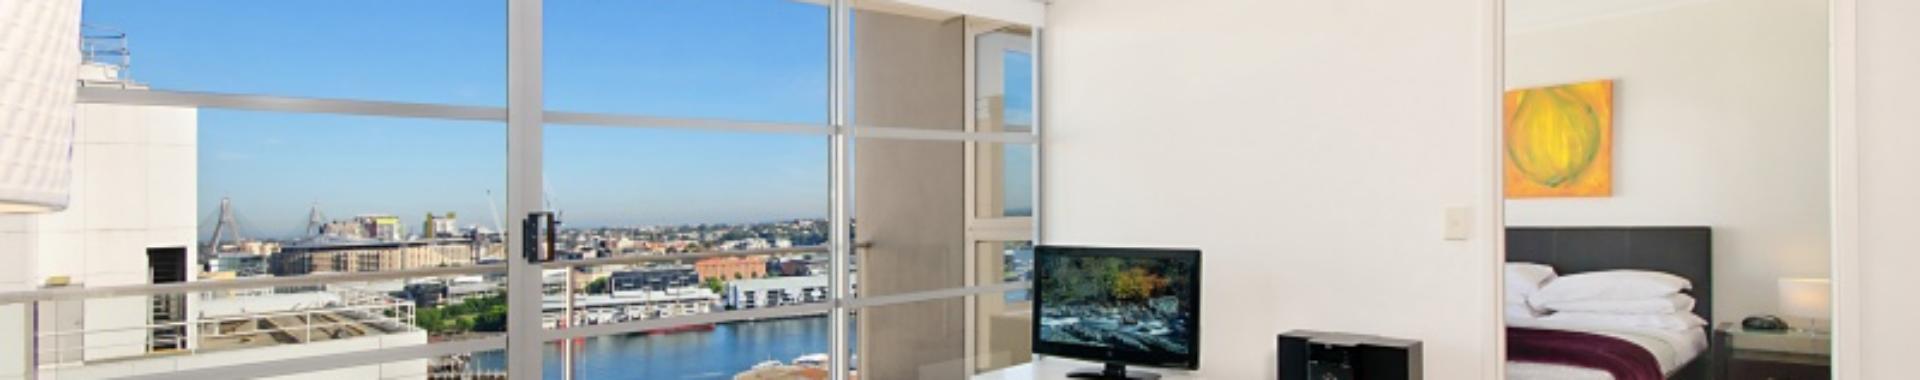 Sydney King Kent 2 bed corporate apartment lounge